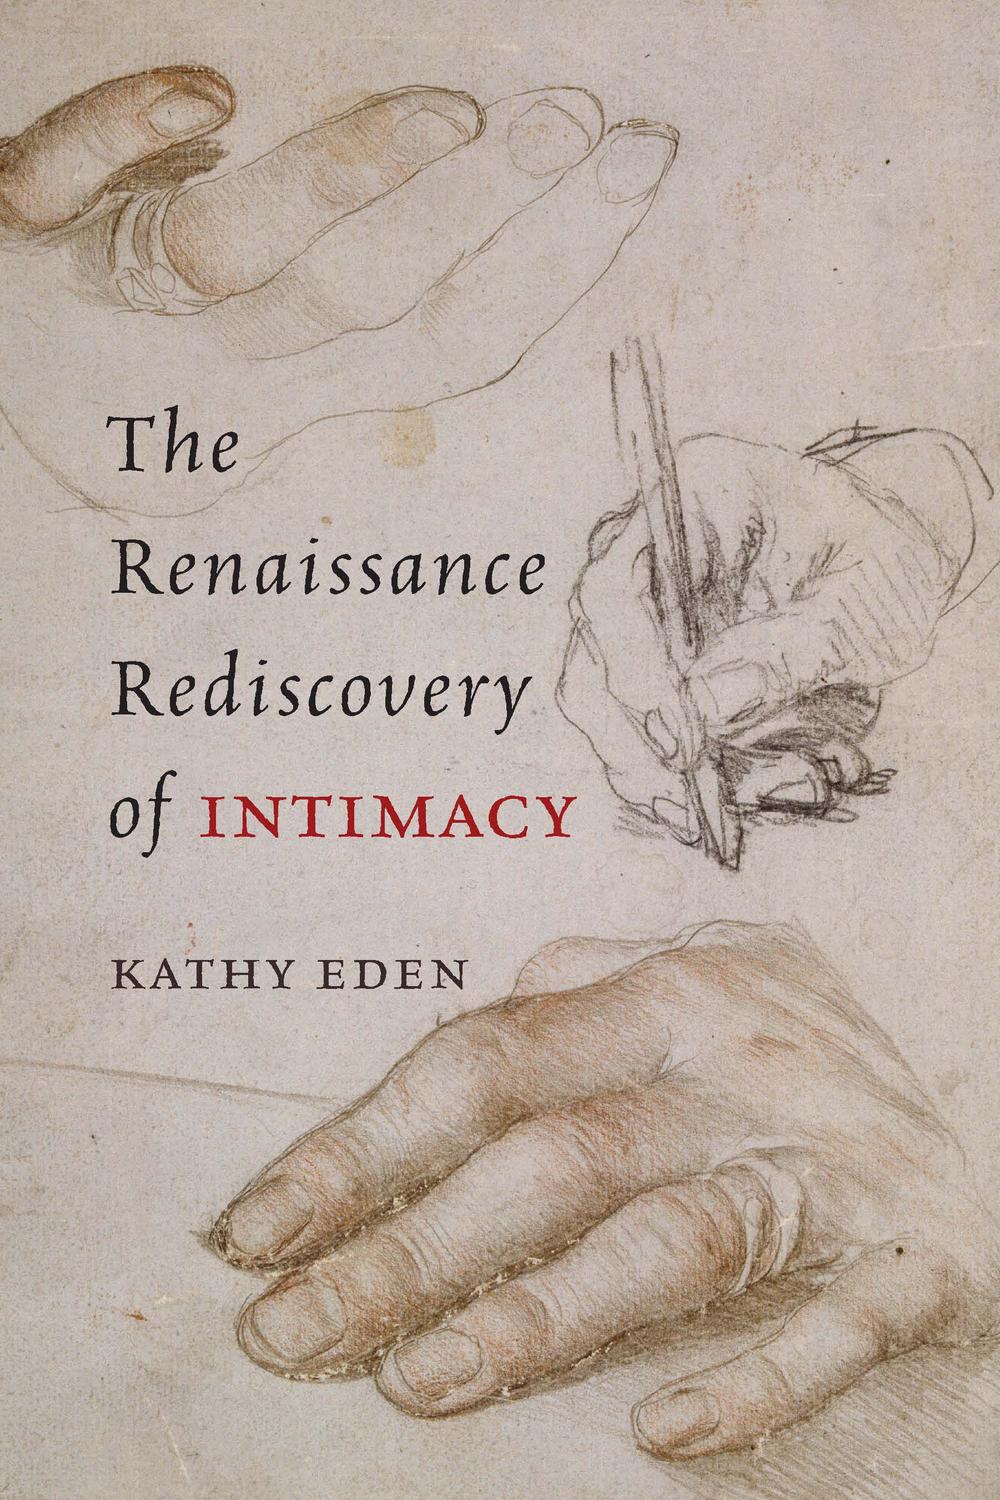 The Renaissance Rediscovery of Intimacy - Kathy Eden